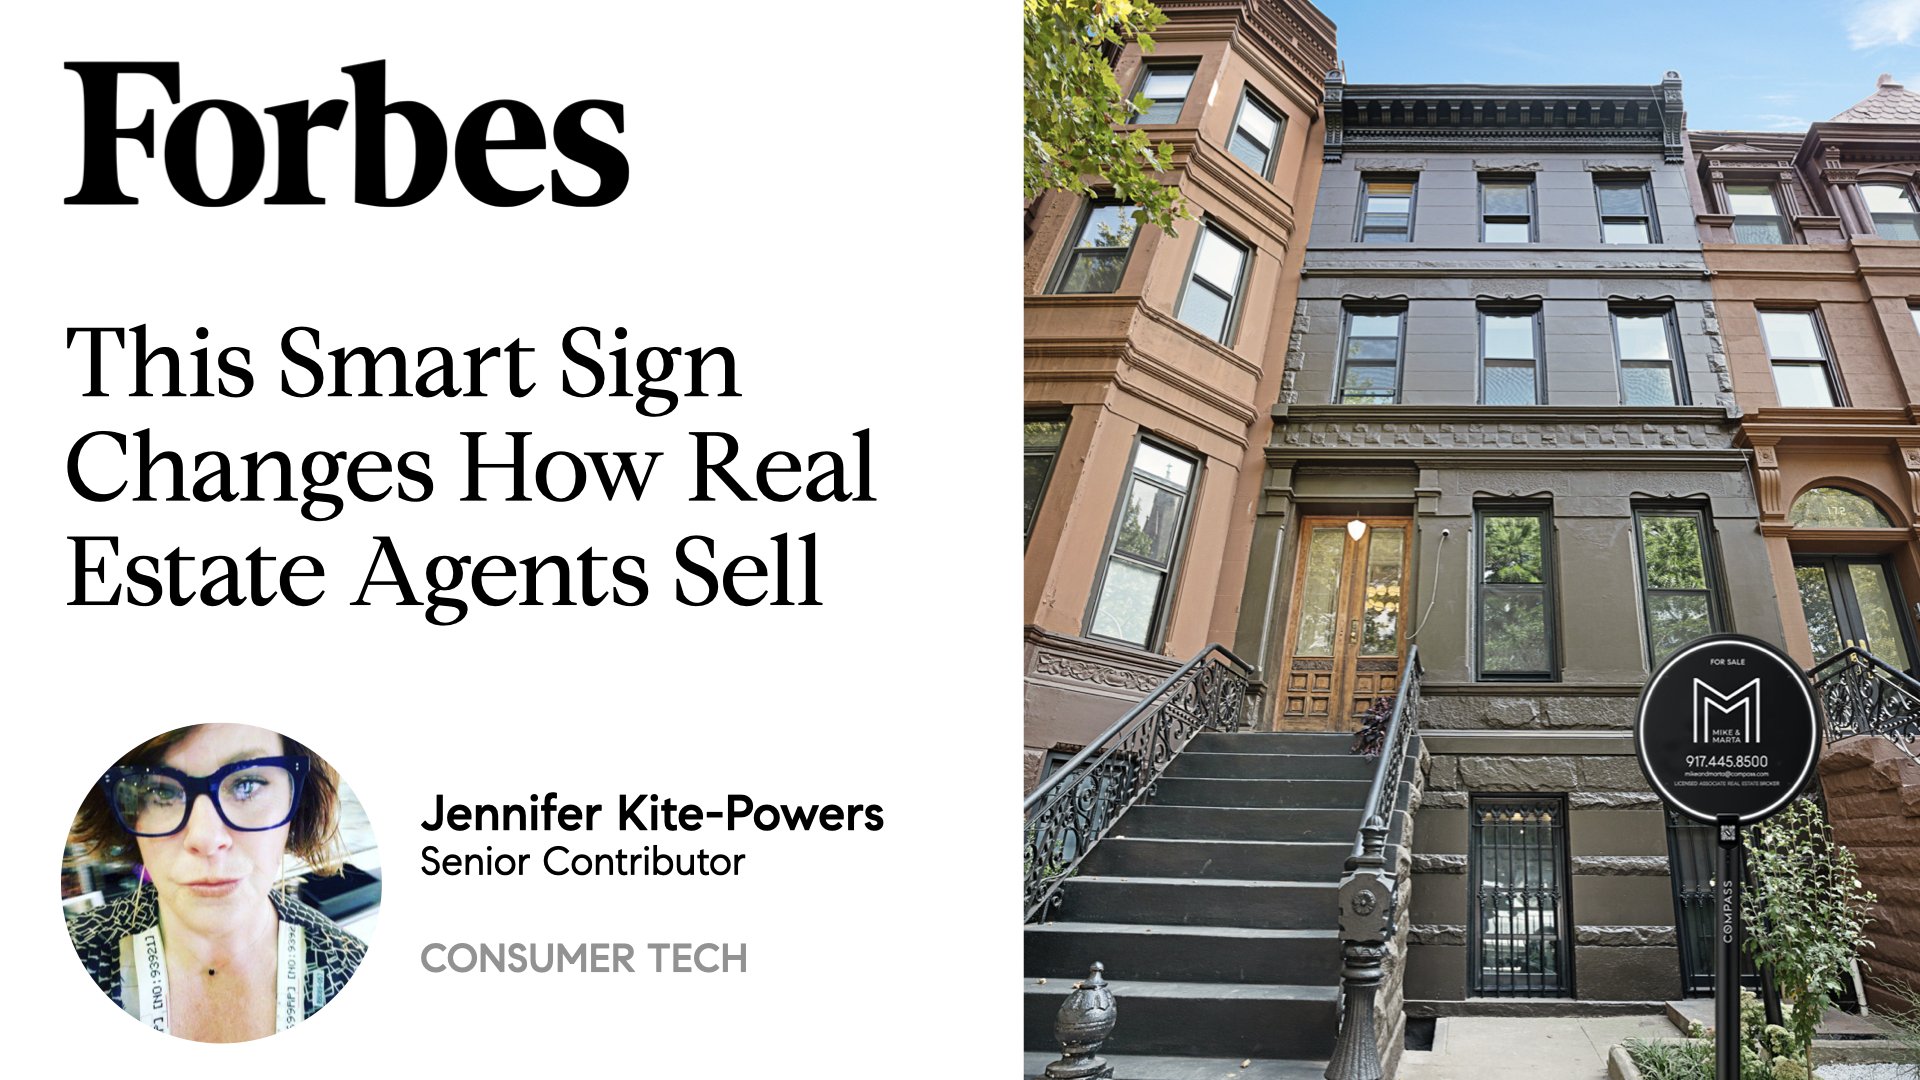 How This Smart Sign Changes How Real Estate Agents Sell